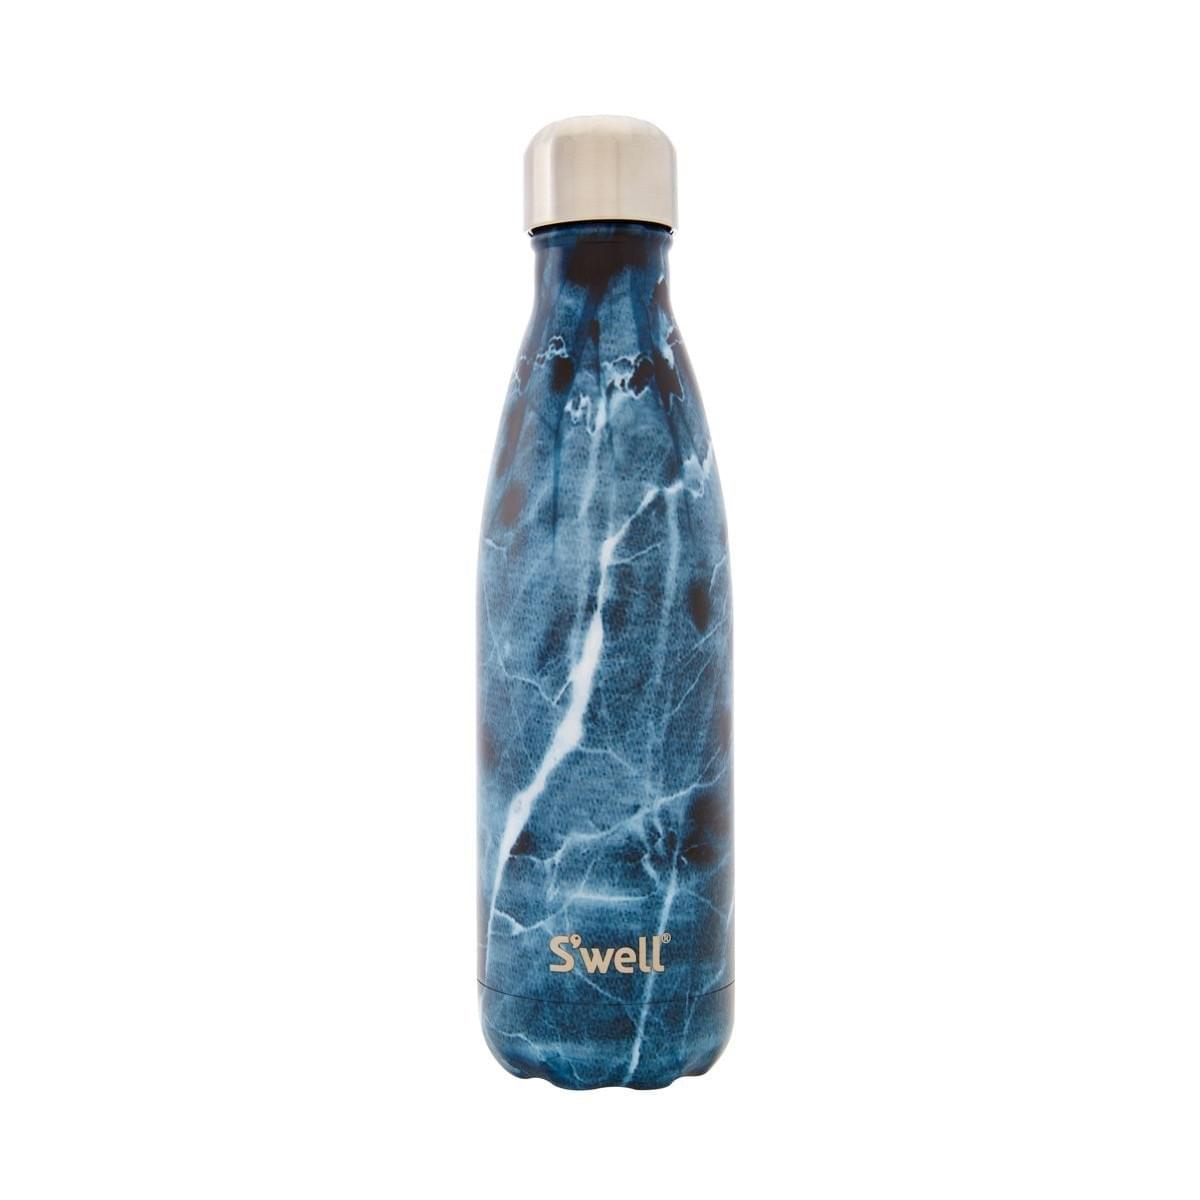 S'well 25oz Stainless Steel Water Bottle: Blue Marble